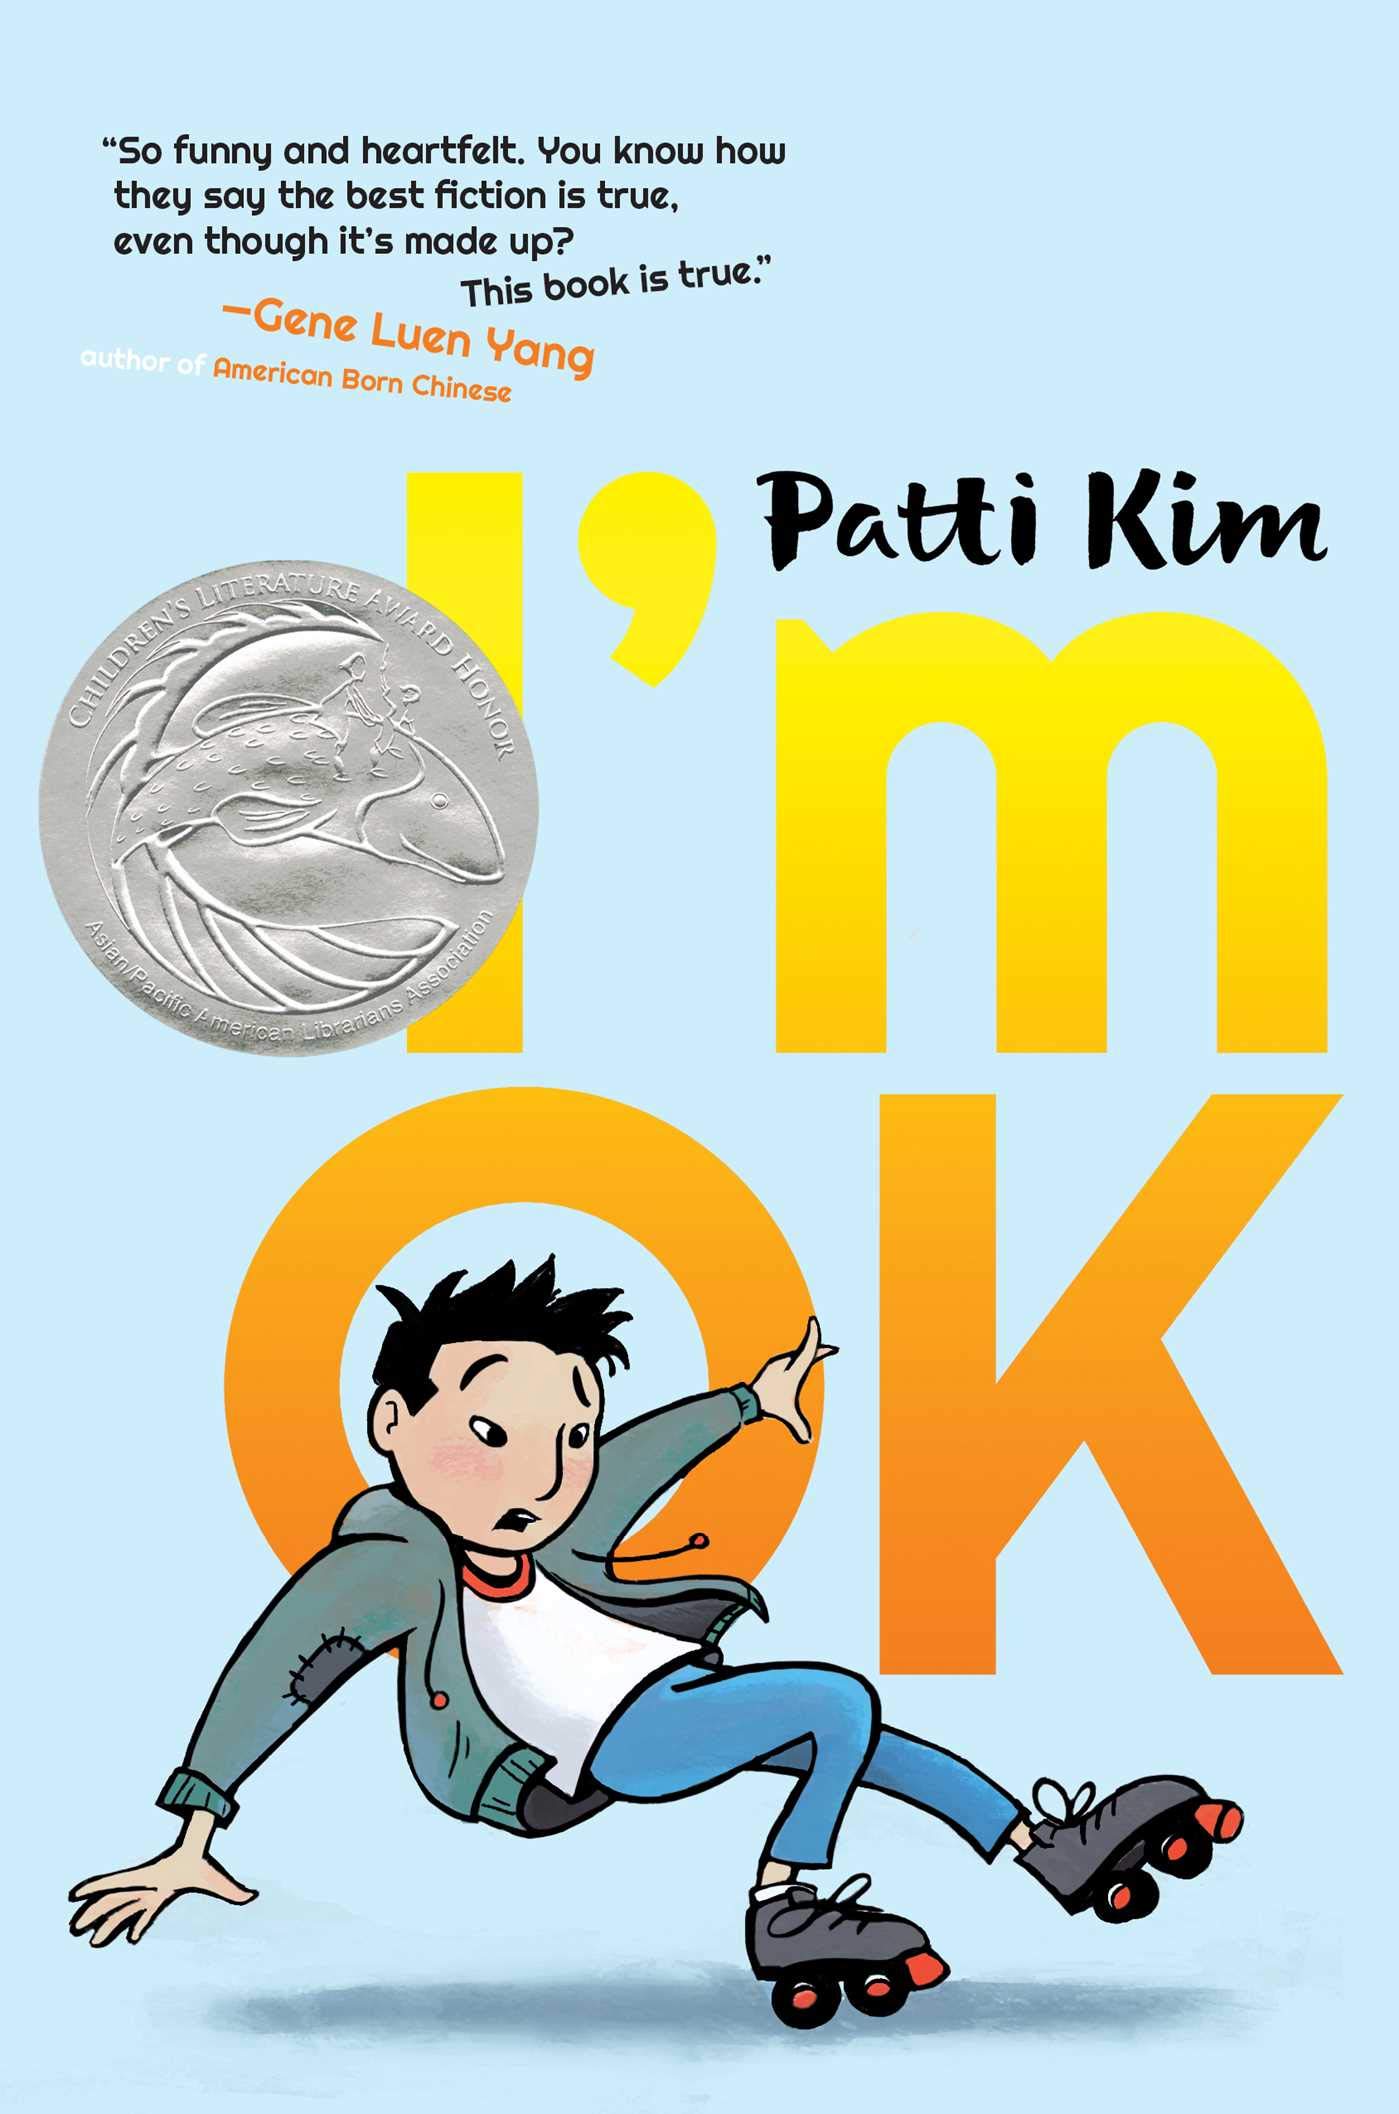 A twelve-year-old boy, Ok Lee, is in the middle of falling to the ground from roller skating. The bookâ€™s title, Iâ€™m OK, is in yellow-orange gradient and against a light blue background. 